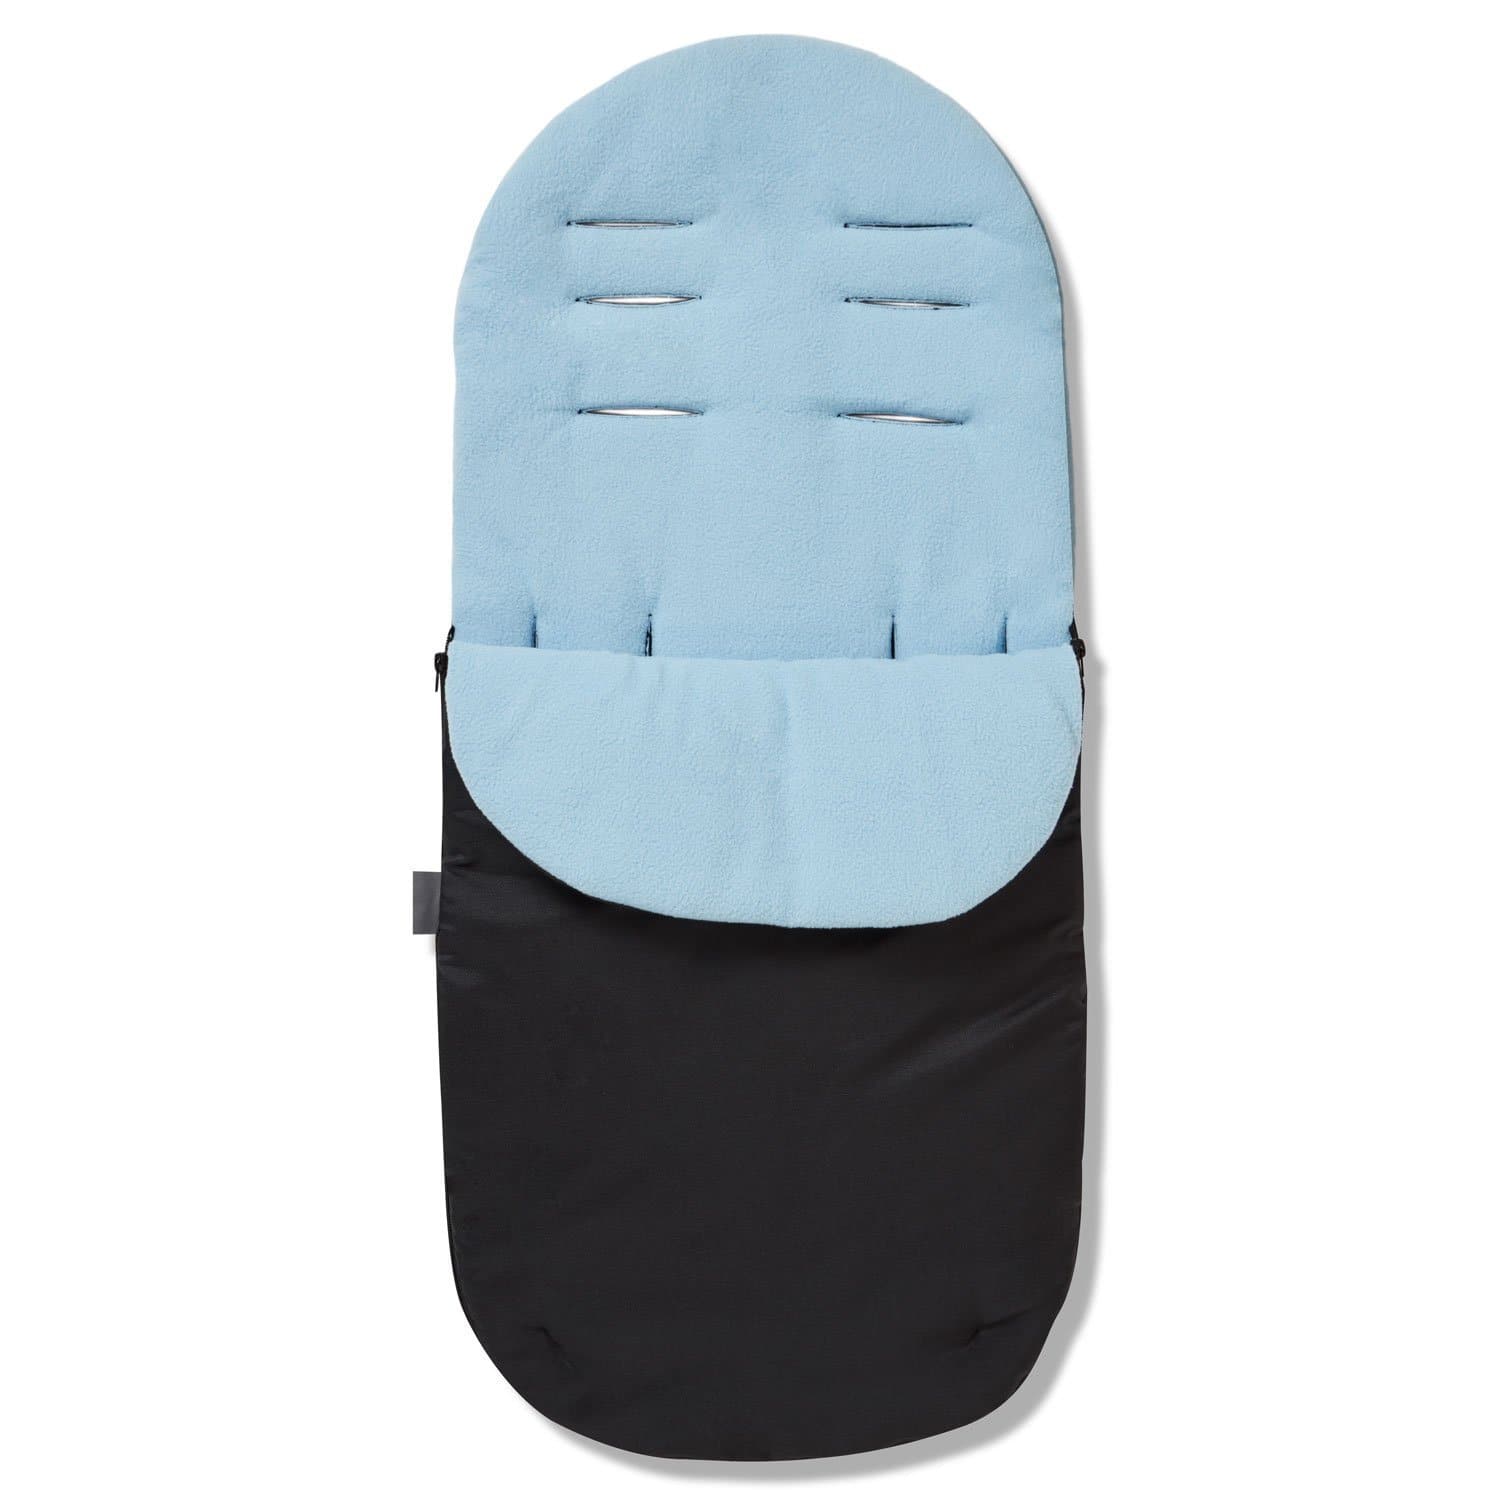 Footmuff / Cosy Toes Compatible with Combi - Light Blue / Fits All Models | For Your Little One